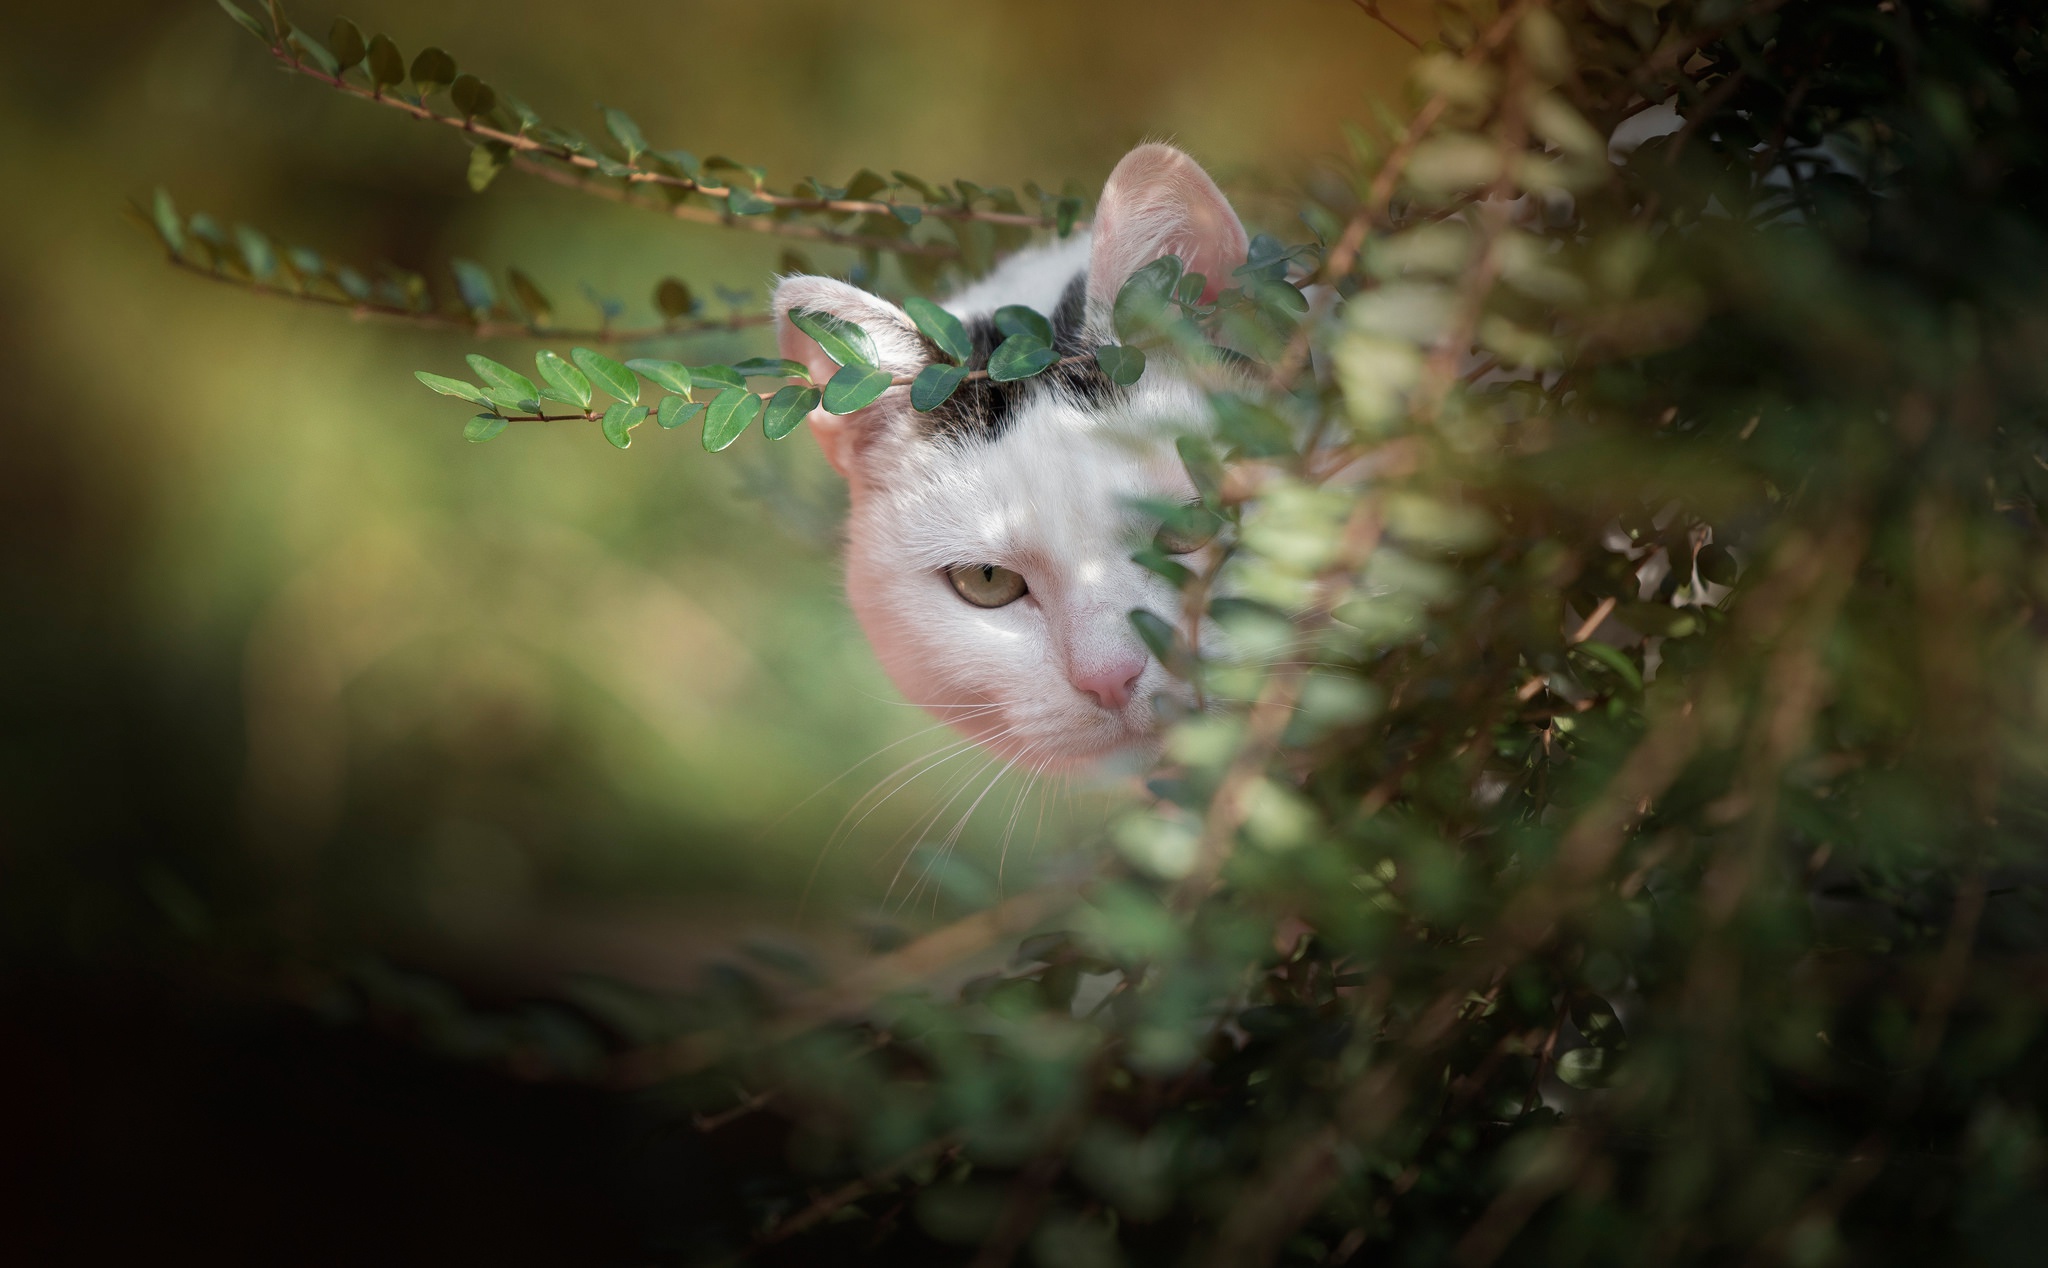 General 2048x1268 cats animals outdoors plants blurred leaves closeup pussy peek